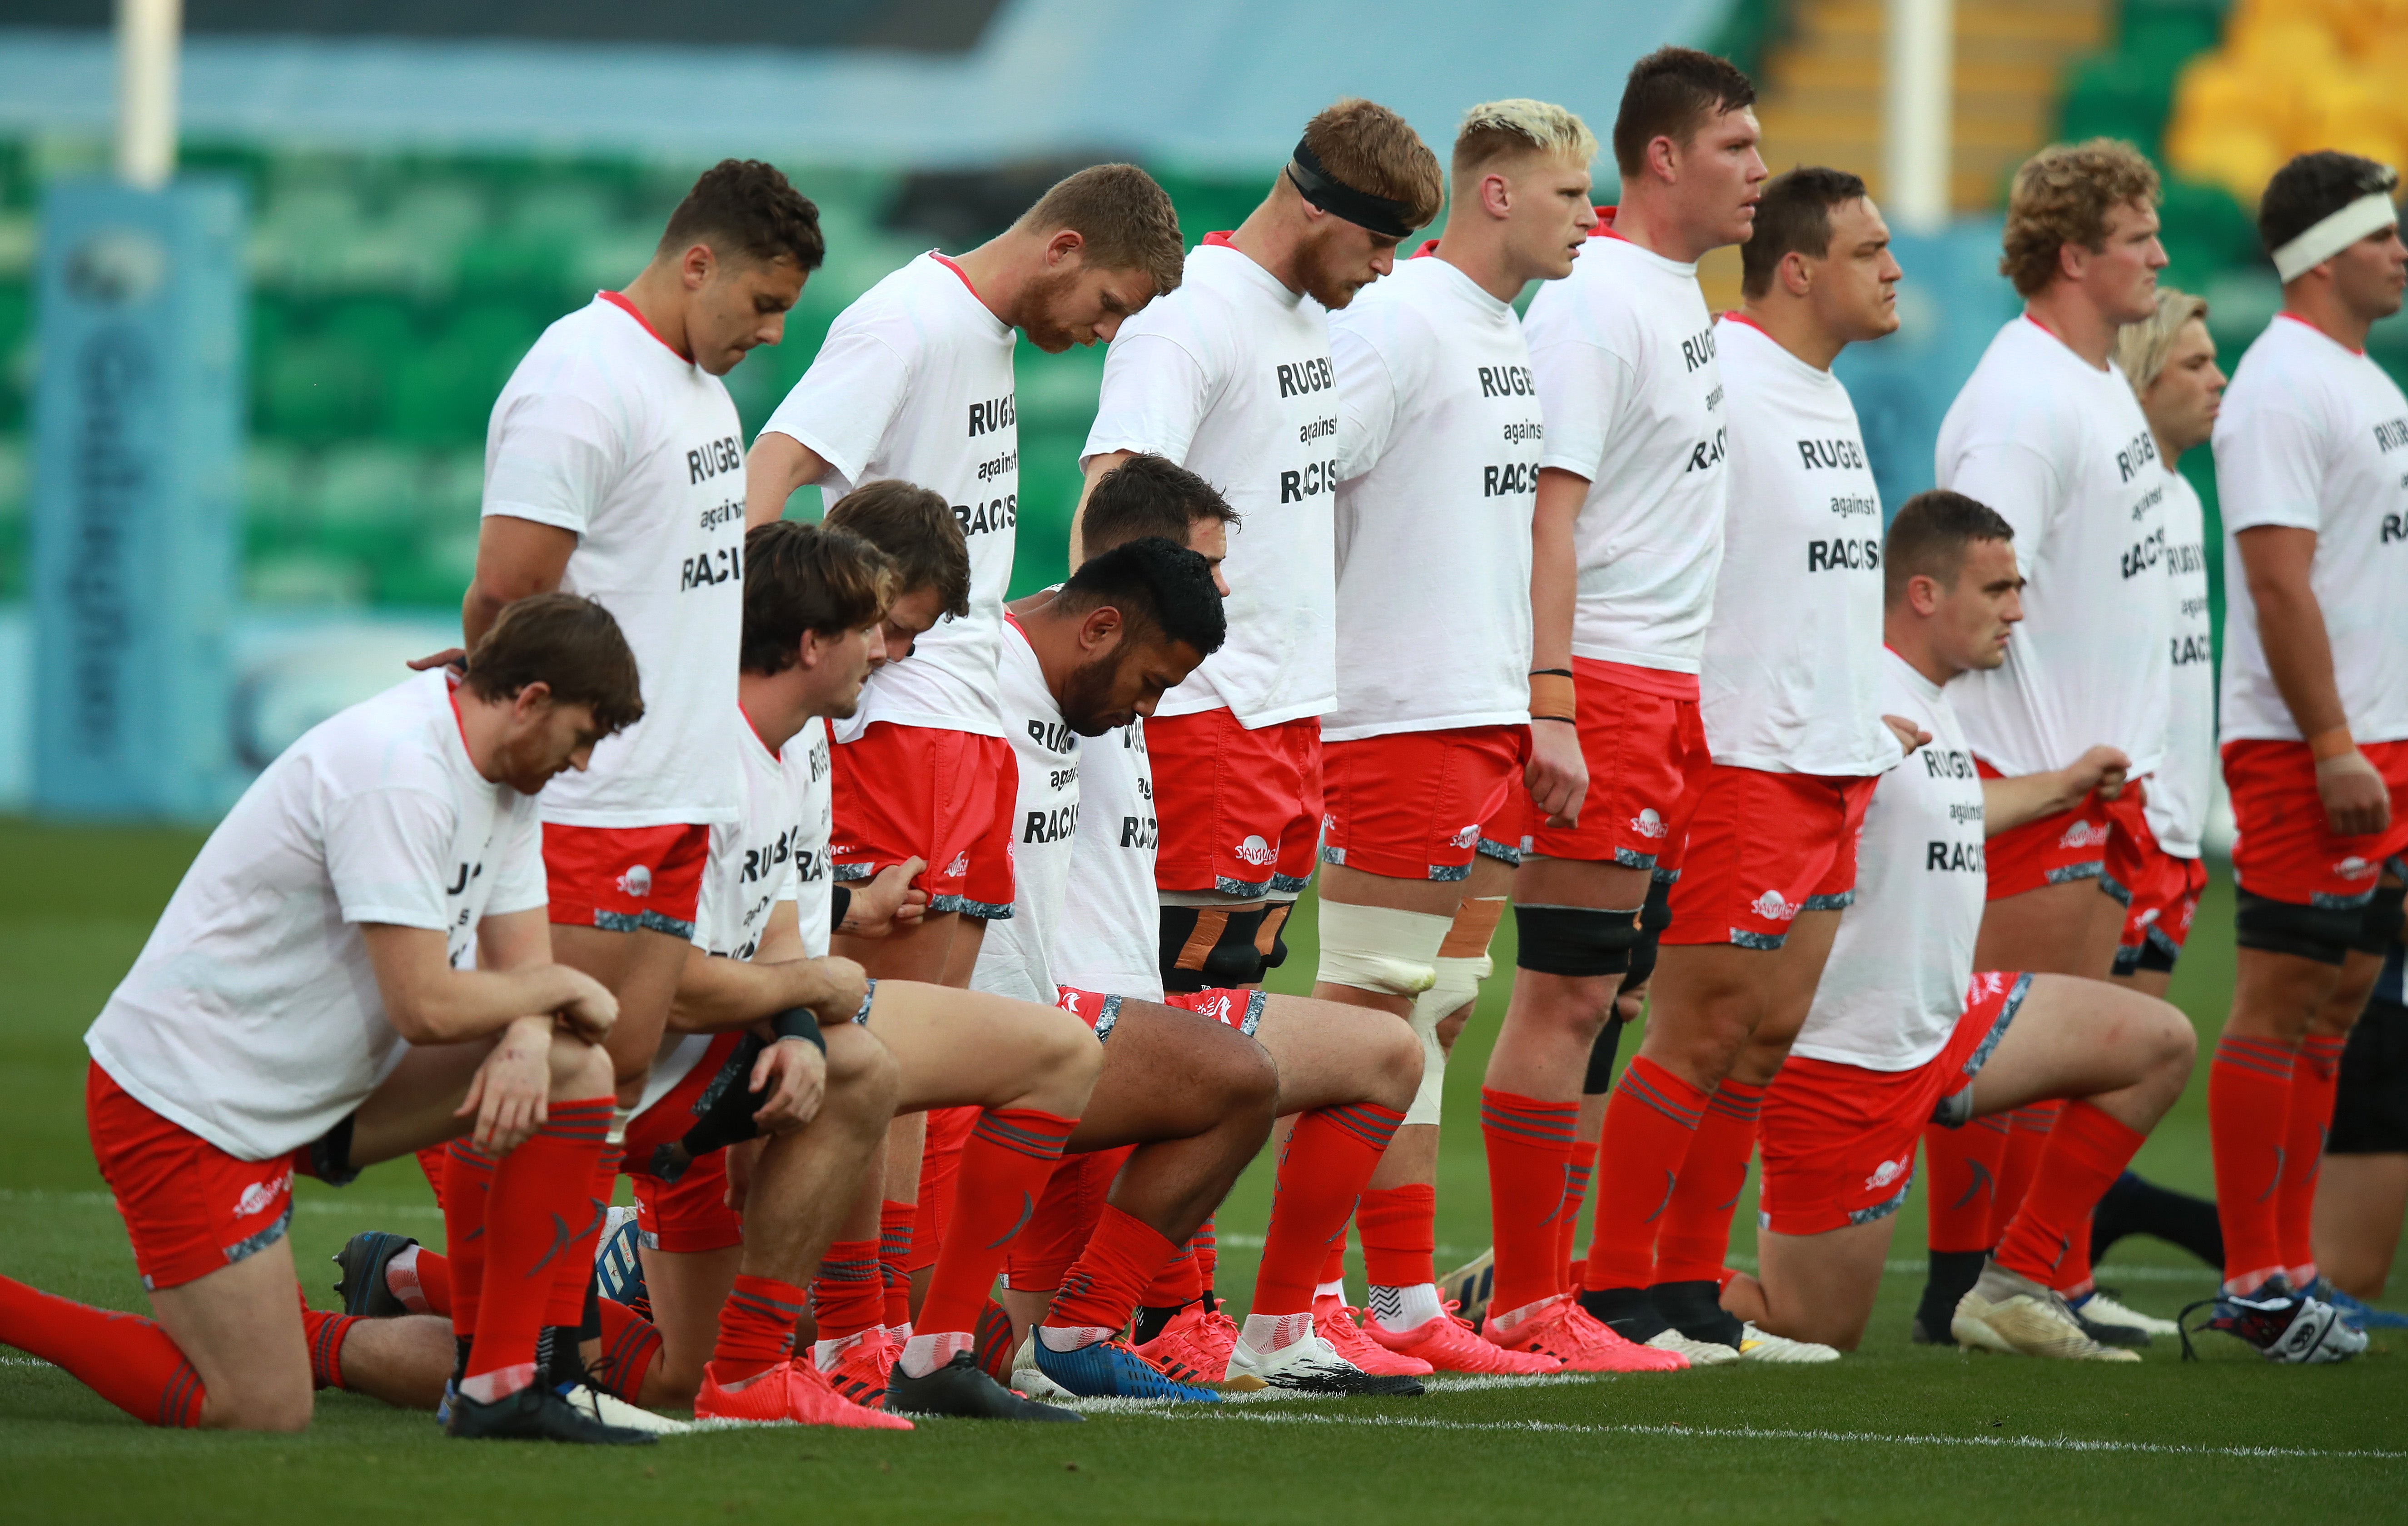 Rugby’s response to Black Lives Matter has not been impressive